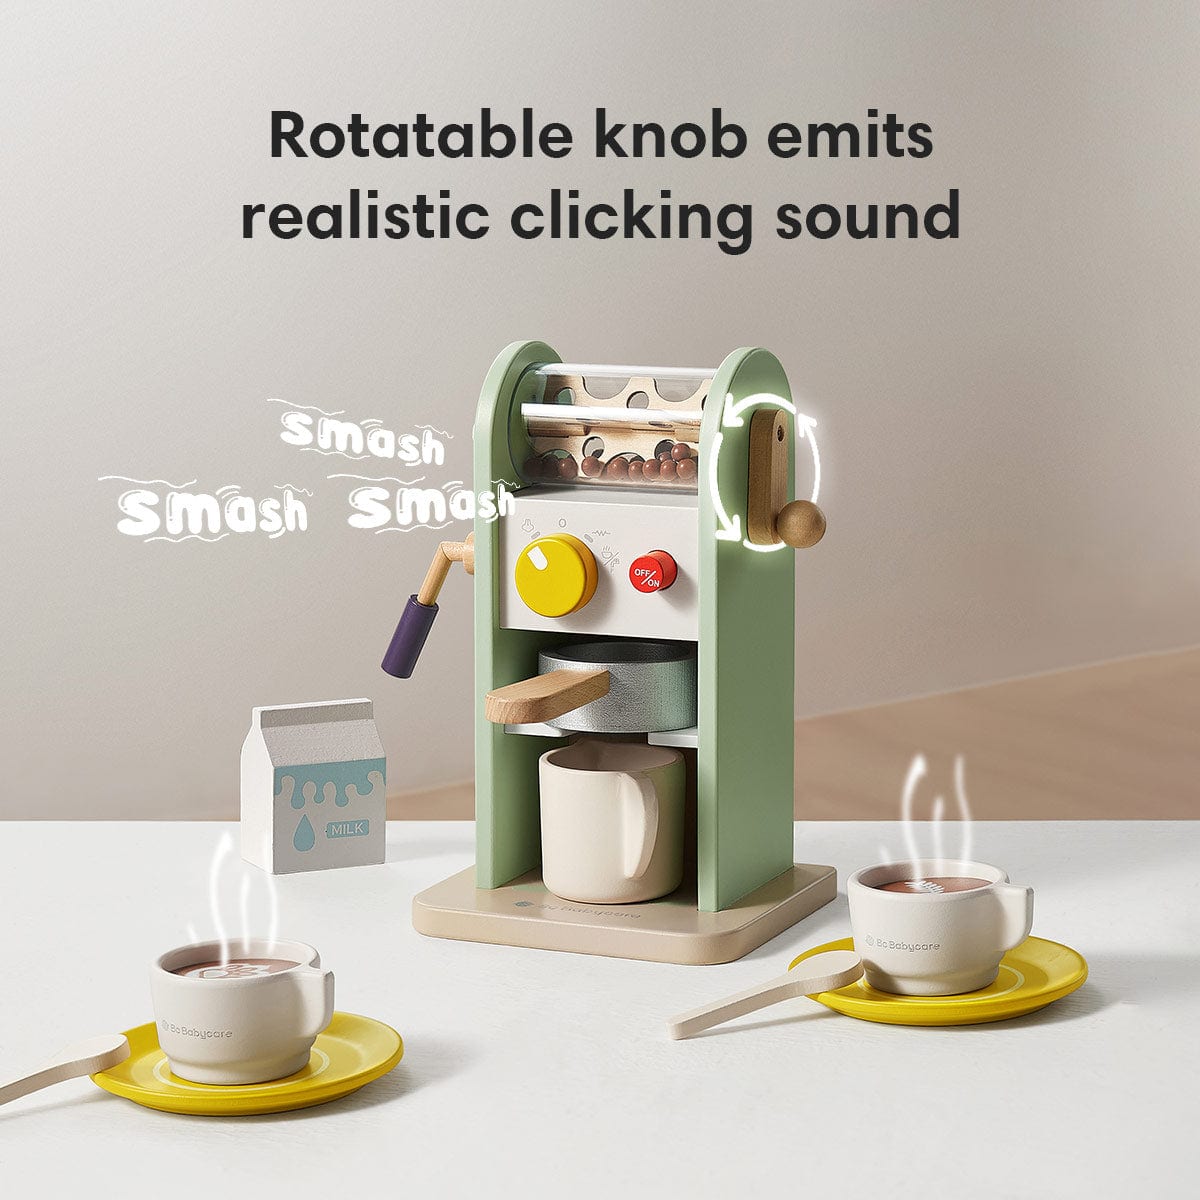 a picture of the coffee maker that has rotatable knob emits and realistic clicking sound